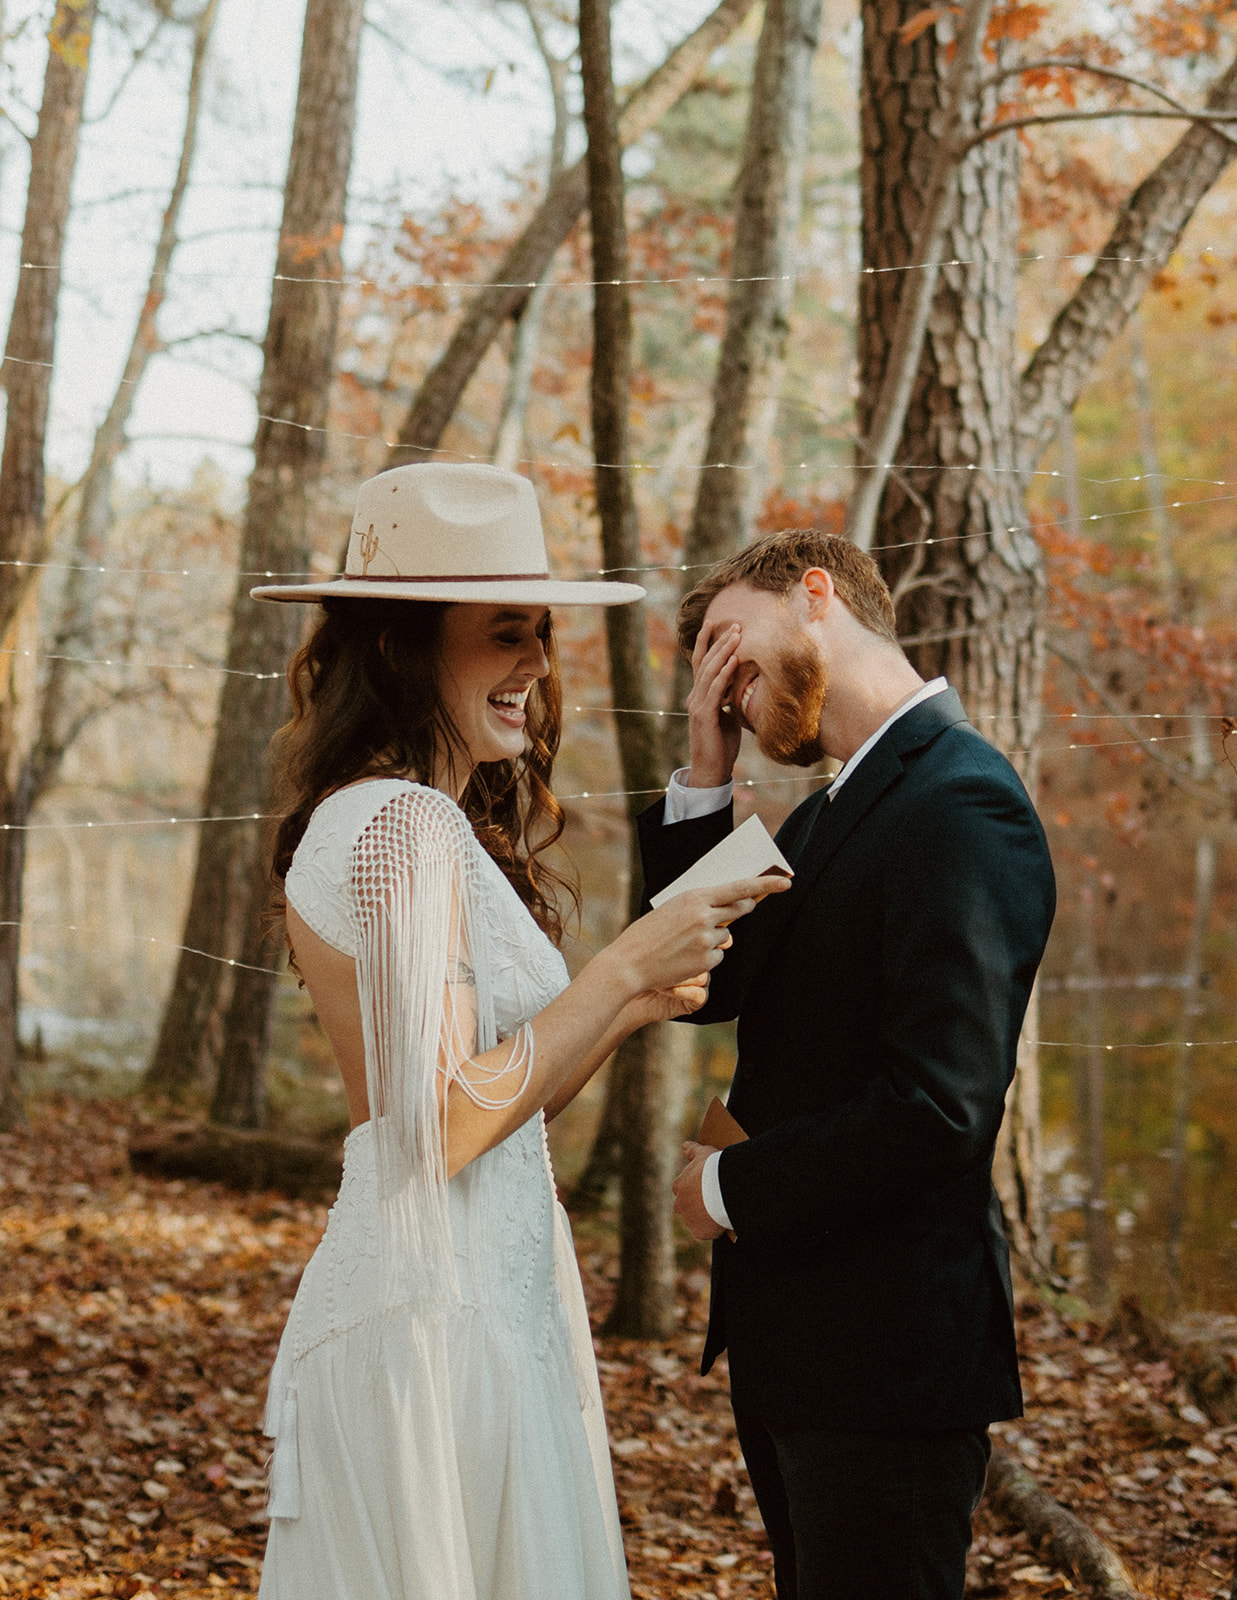 the couple laughing together during their vows at their elopement in Georgia